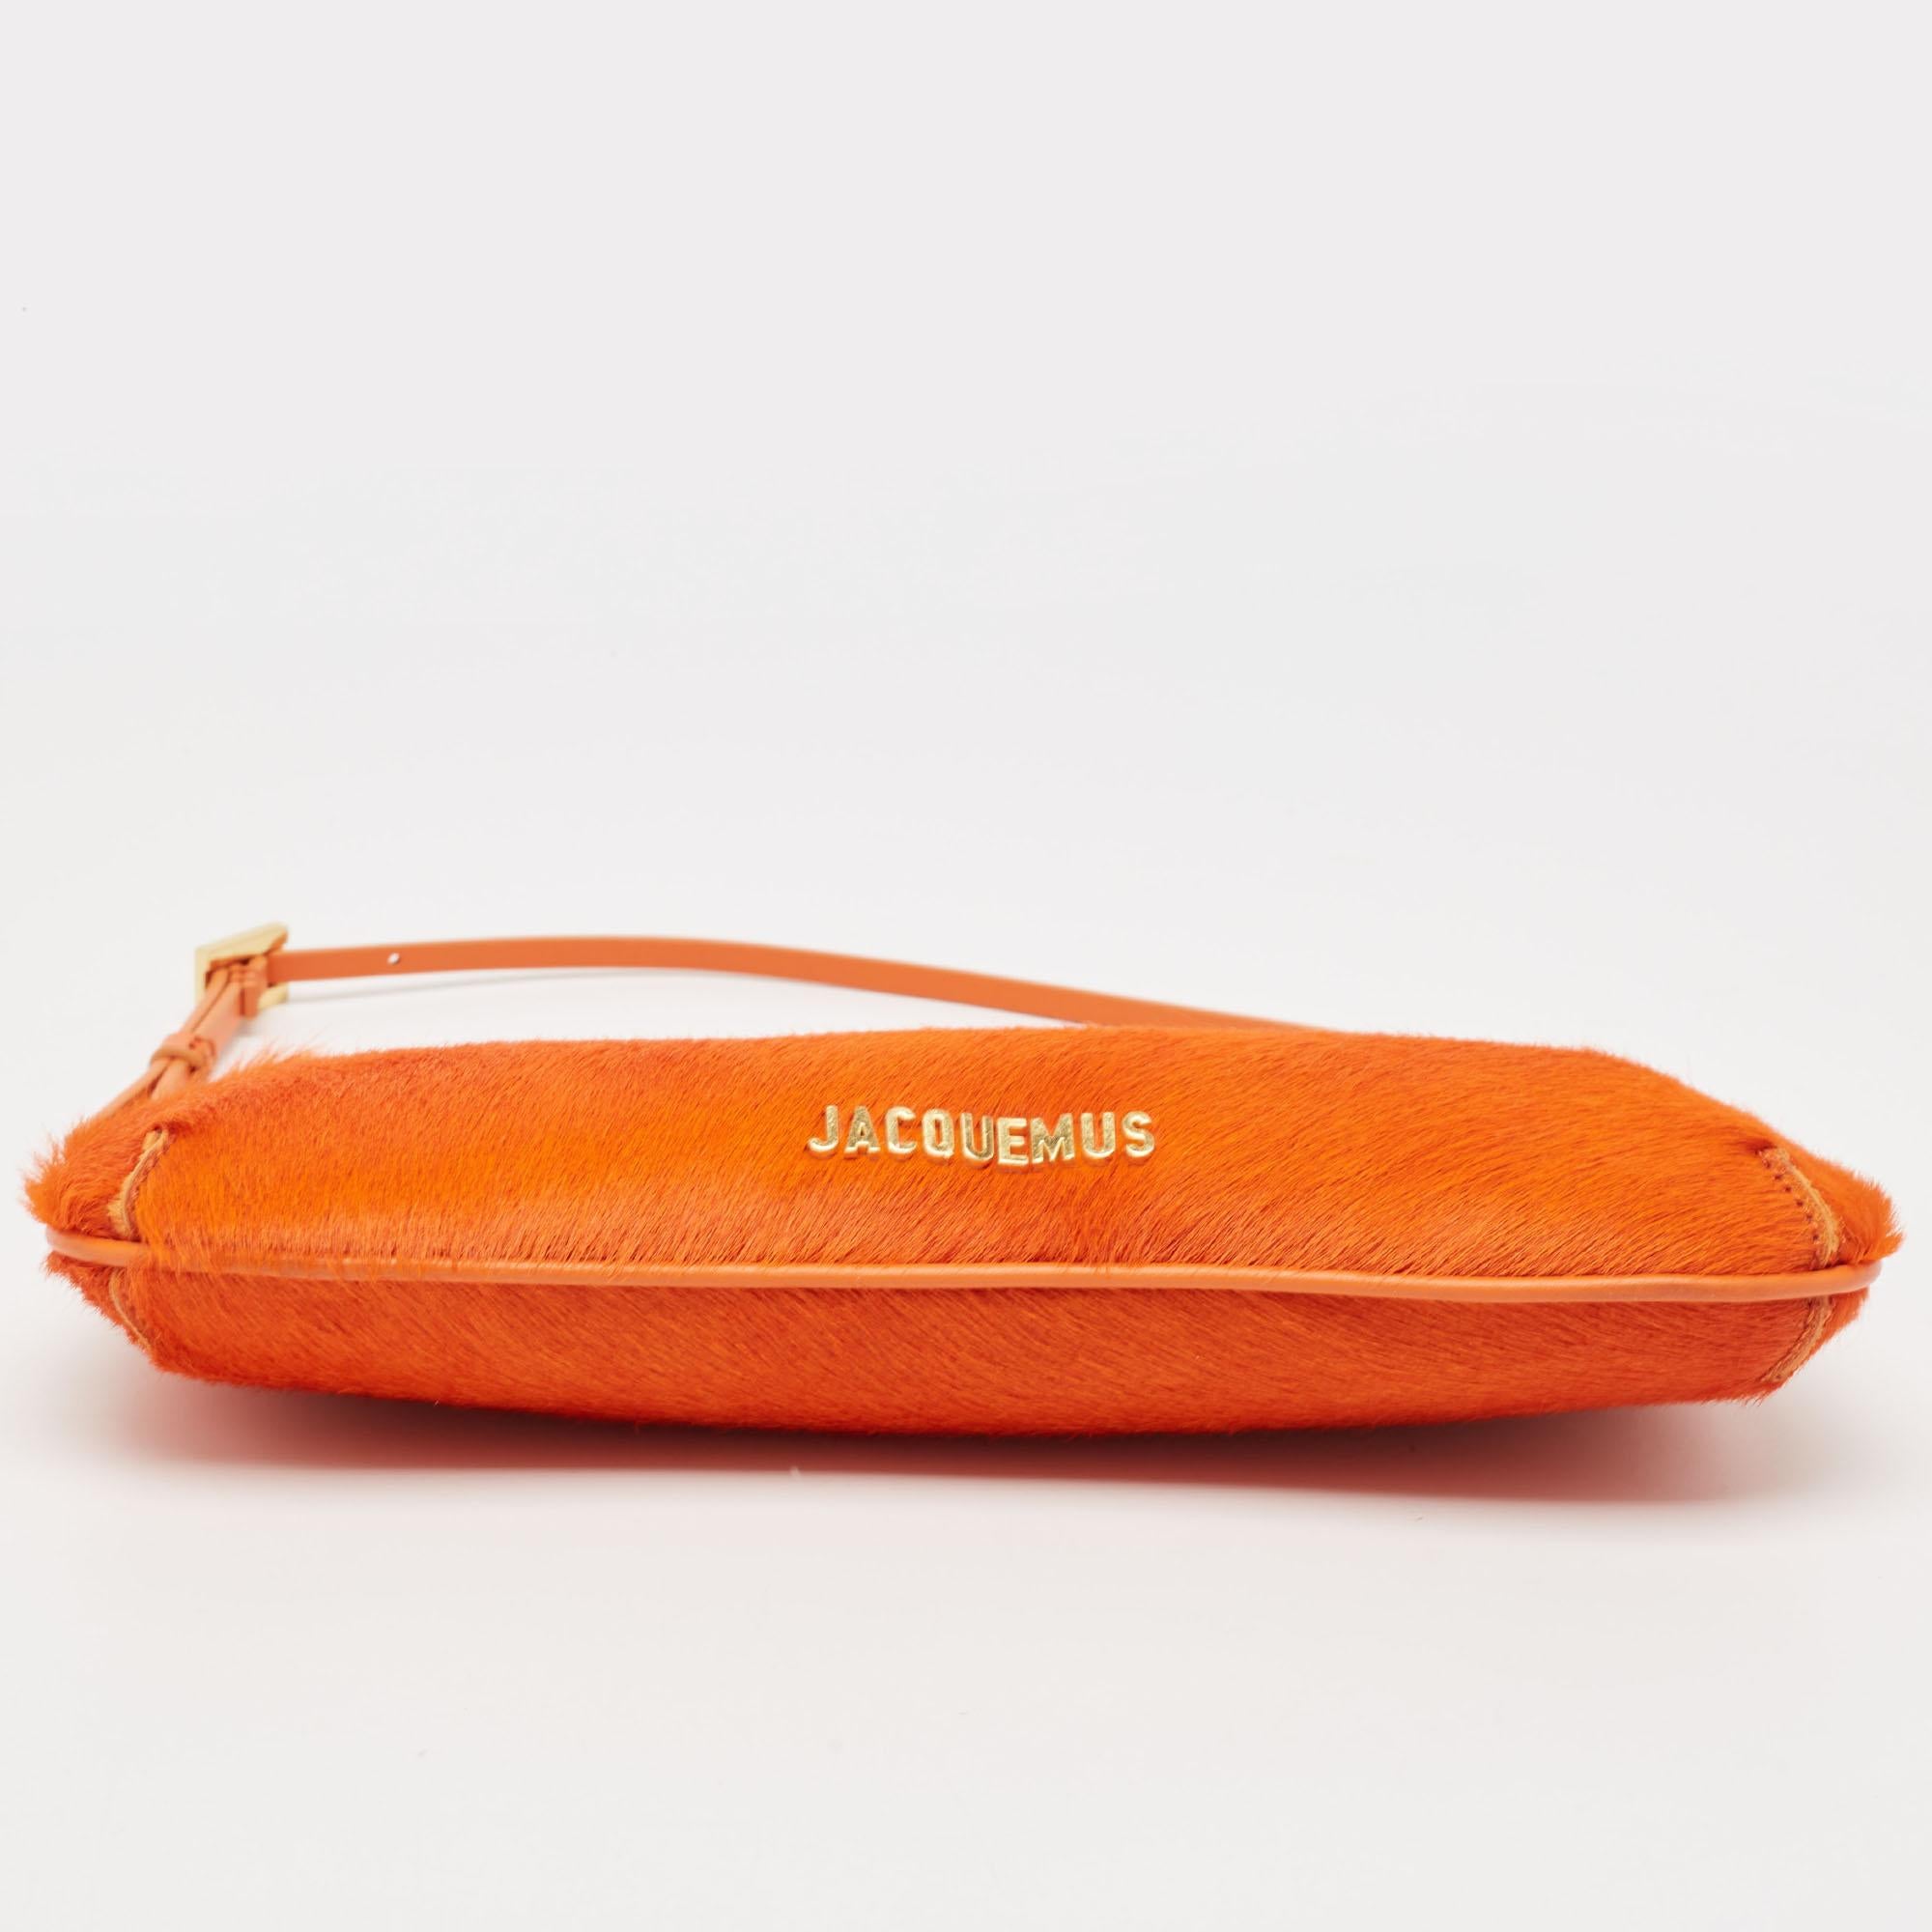 Jacquemus Orange Calf Hair and Leather Le Bisou Baguette Bag For Sale 1